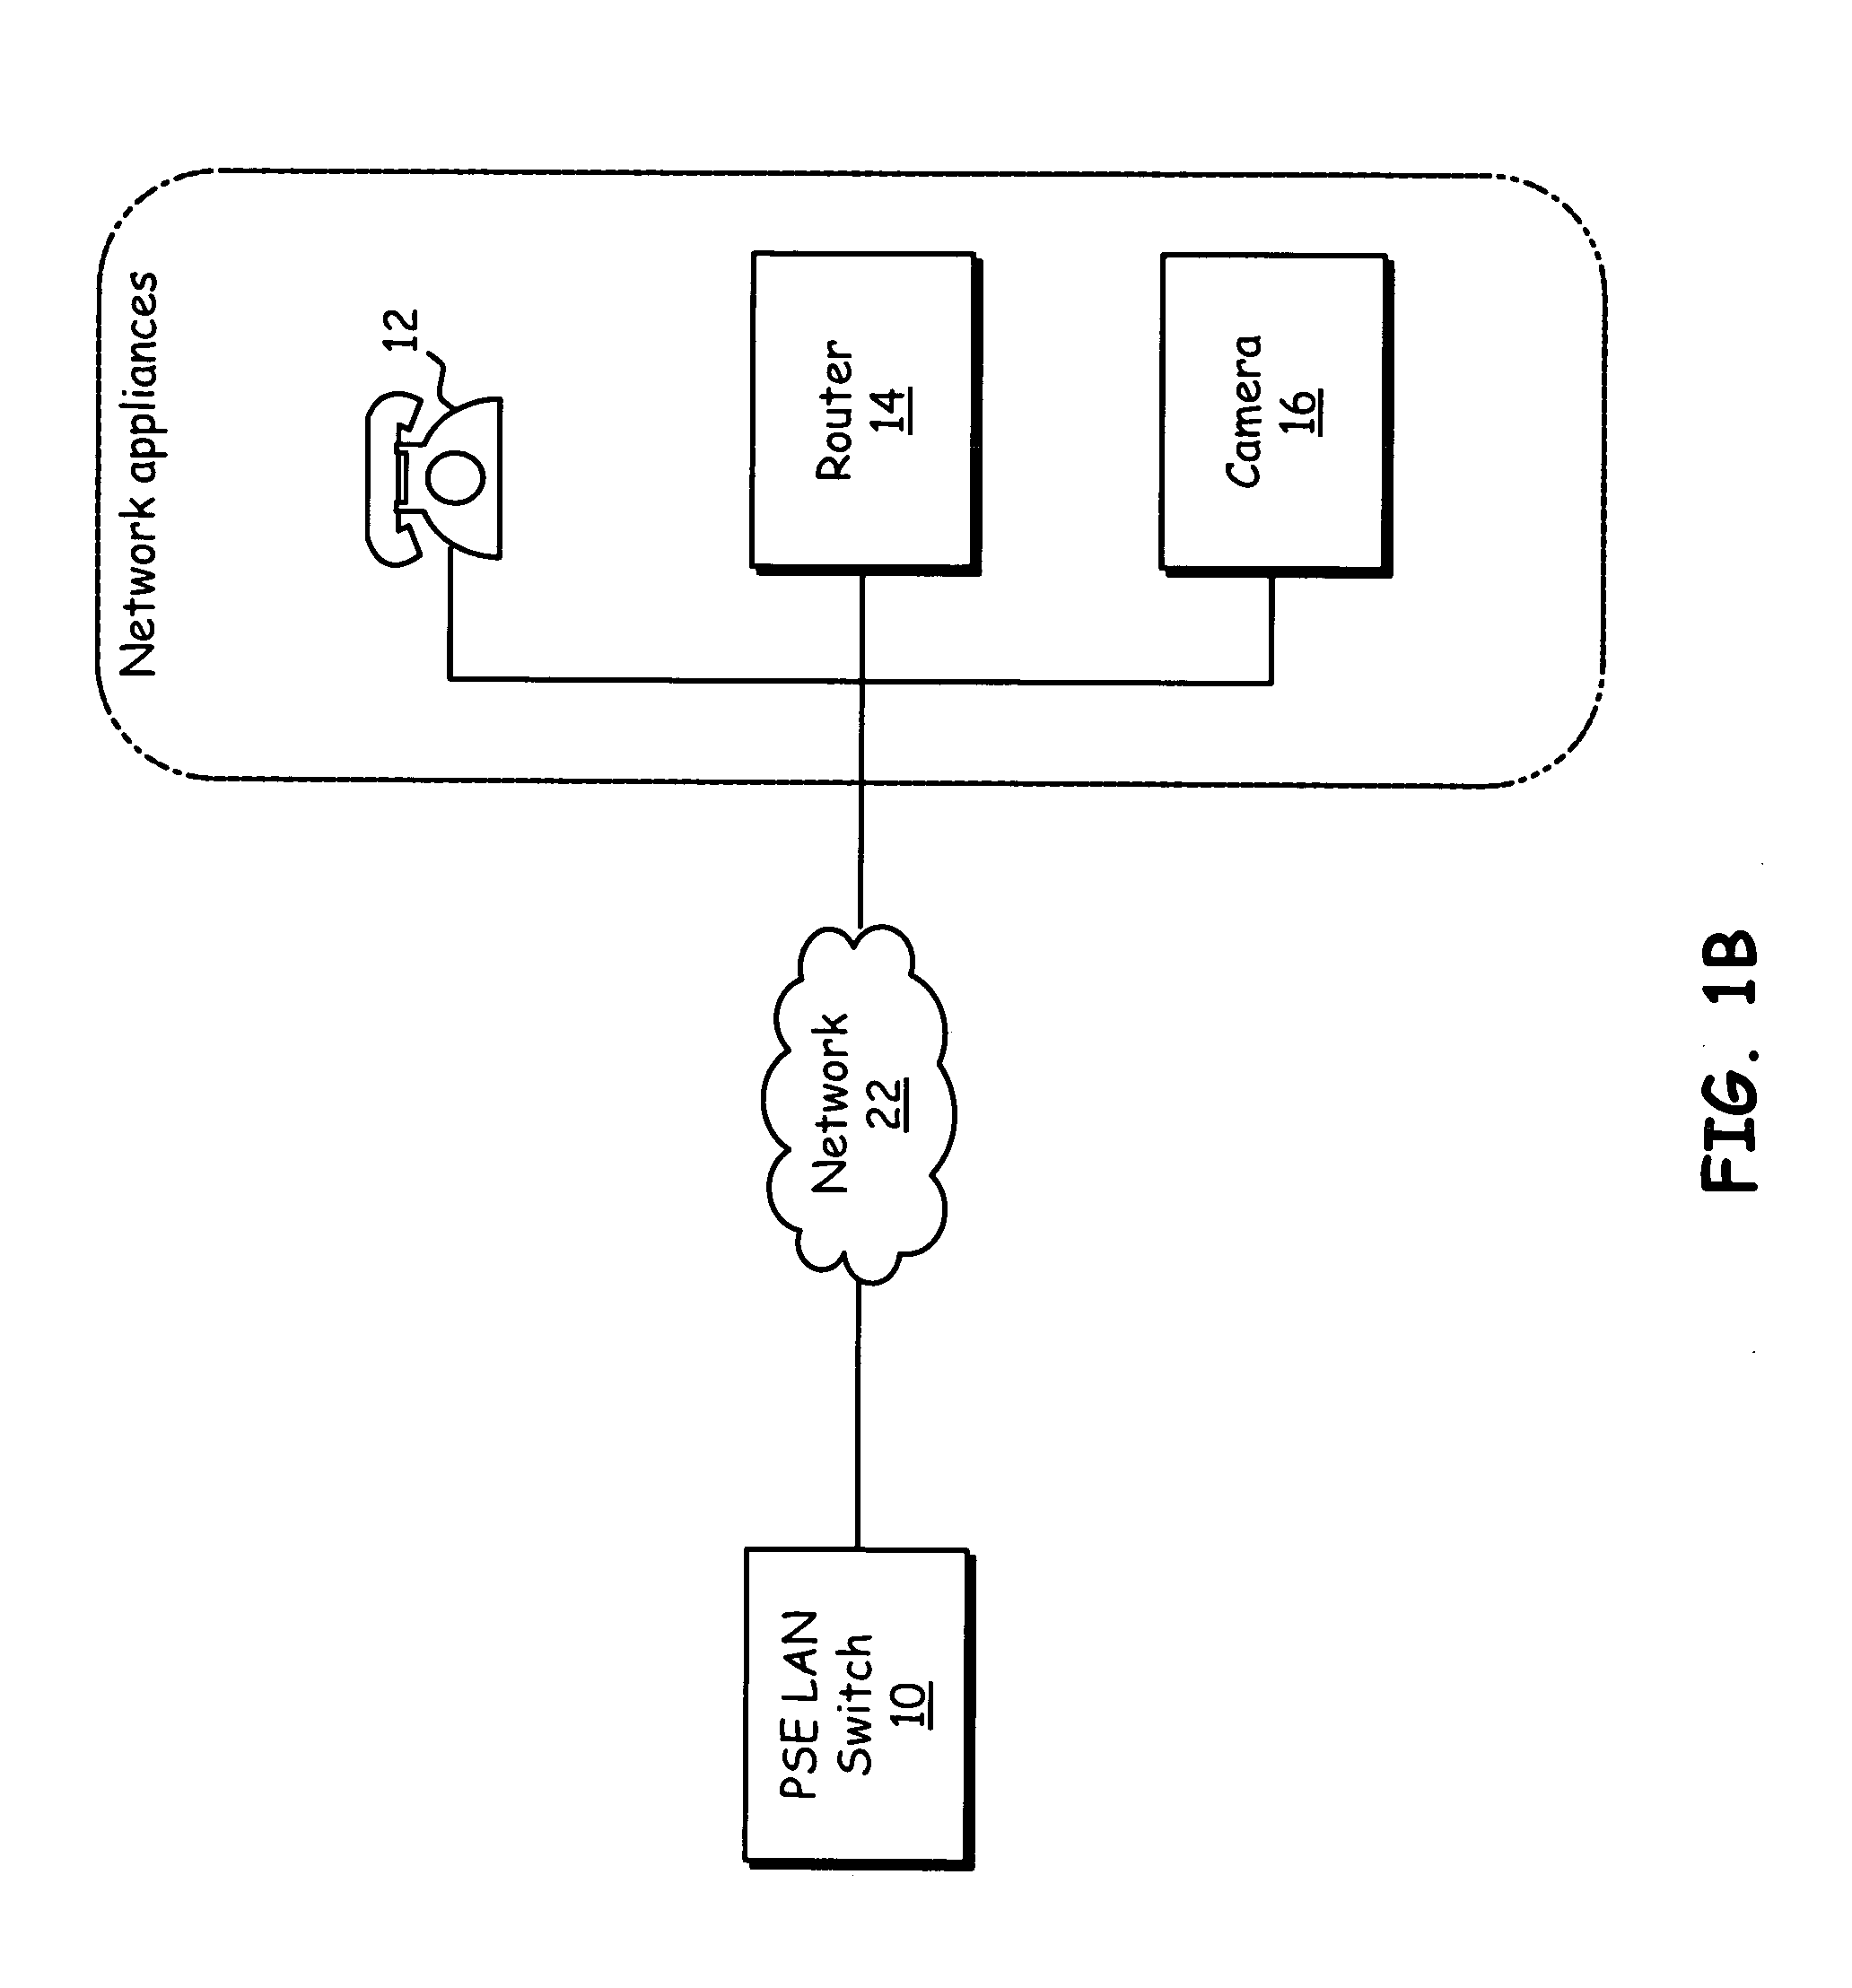 System and method to detect power distribution fault conditions and distribute power to a network attached power device